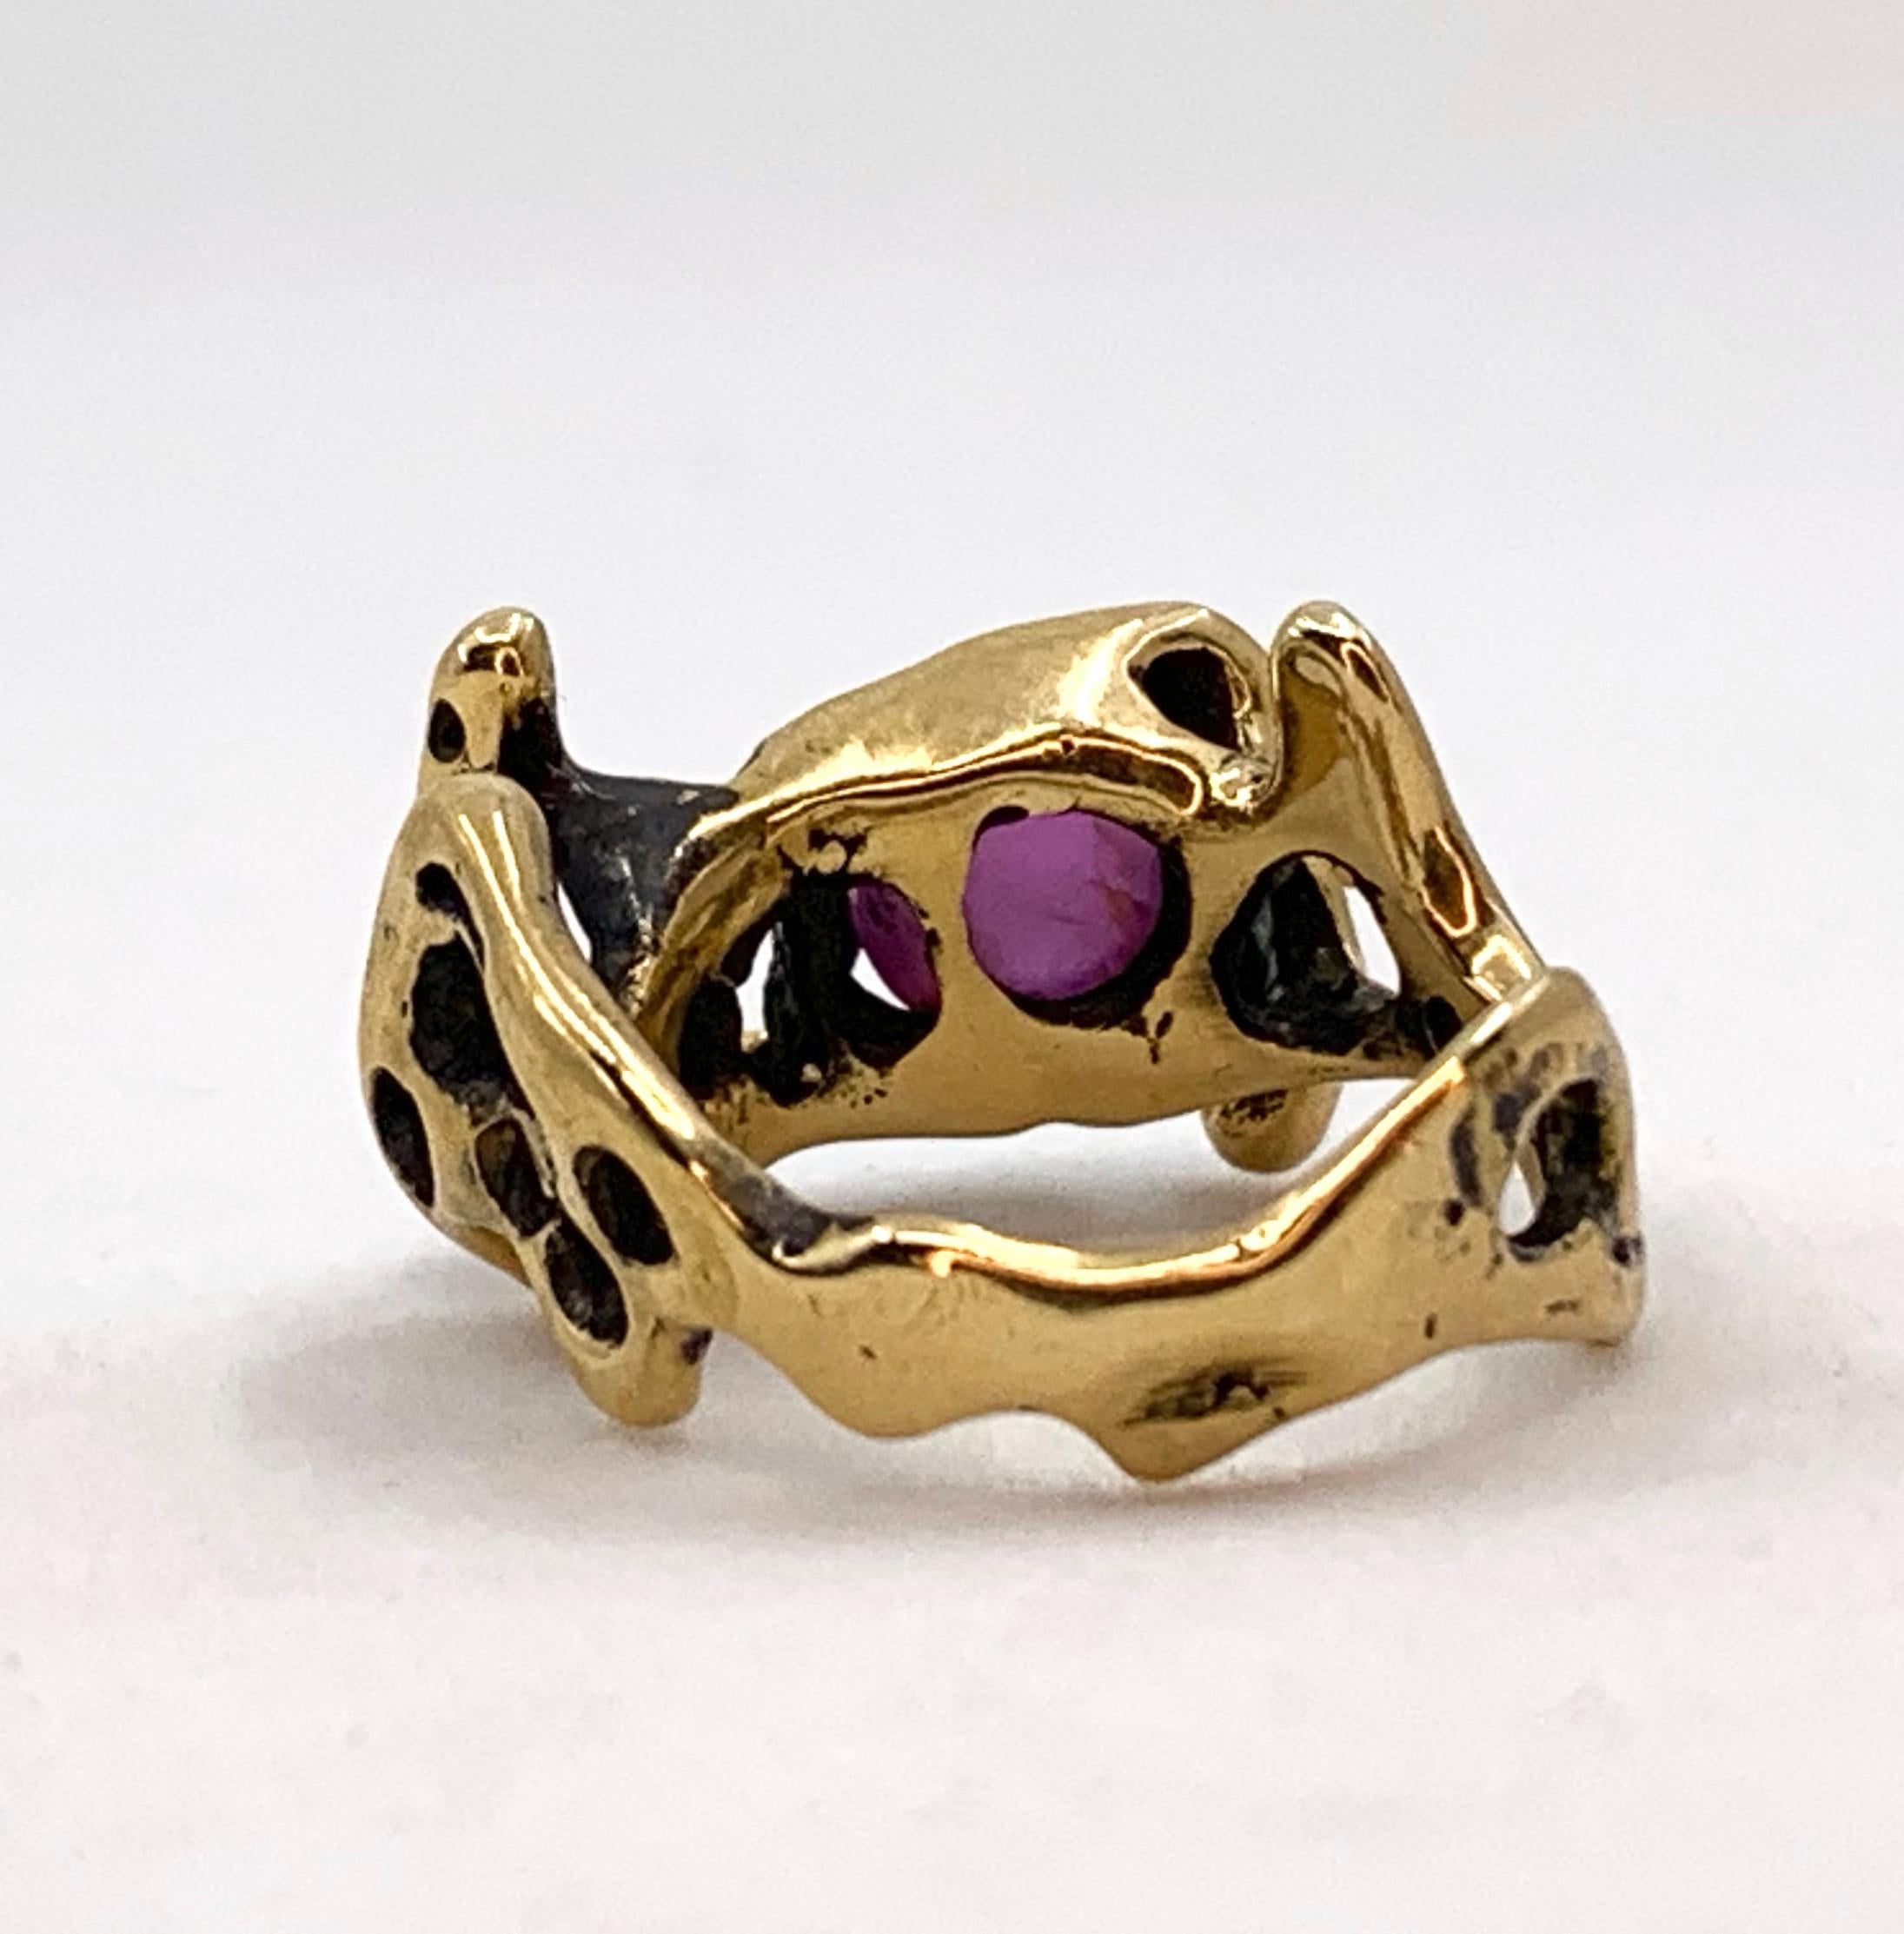 Abstract Studio Ring in 18 Karat Yellow Gold with 3.5 Carat Ruby Cabochon For Sale 7